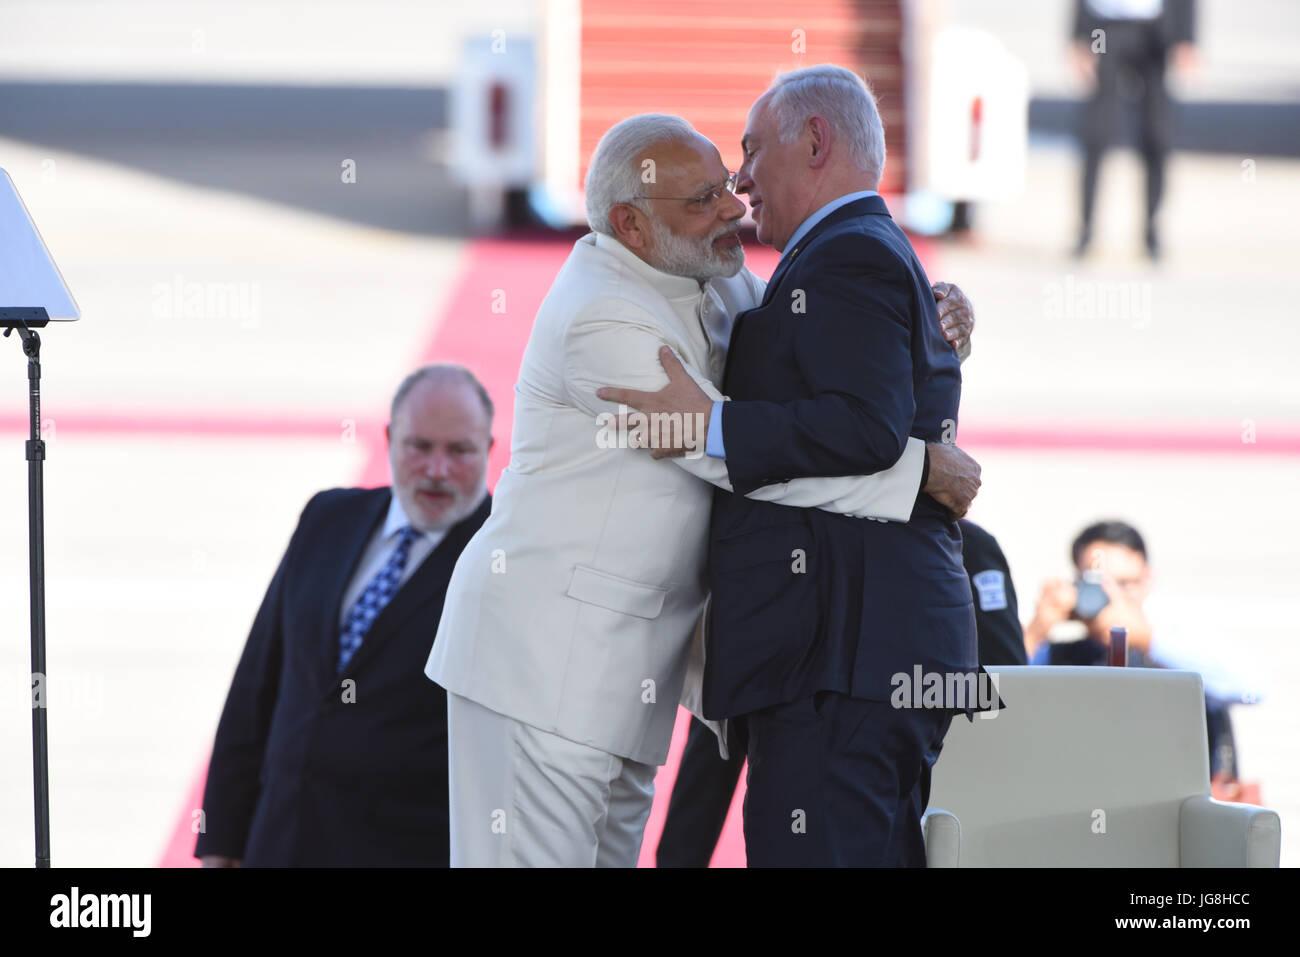 Tel Aviv, Israel. 4th July, 2017. Israeli Prime Minister Benjamin Netanyahu (R) welcomes Indian Prime Minister Narendra Modi at Ben Gurion International Airport outside Tel Aviv, Israel, on July 4, 2017. Indian Prime Minister Narendra Modi landed in Israel Tuesday for the first-ever visit of an Indian prime minister to the country, in bid to boost all-round ties. Credit: JINI/Xinhua/Alamy Live News Stock Photo